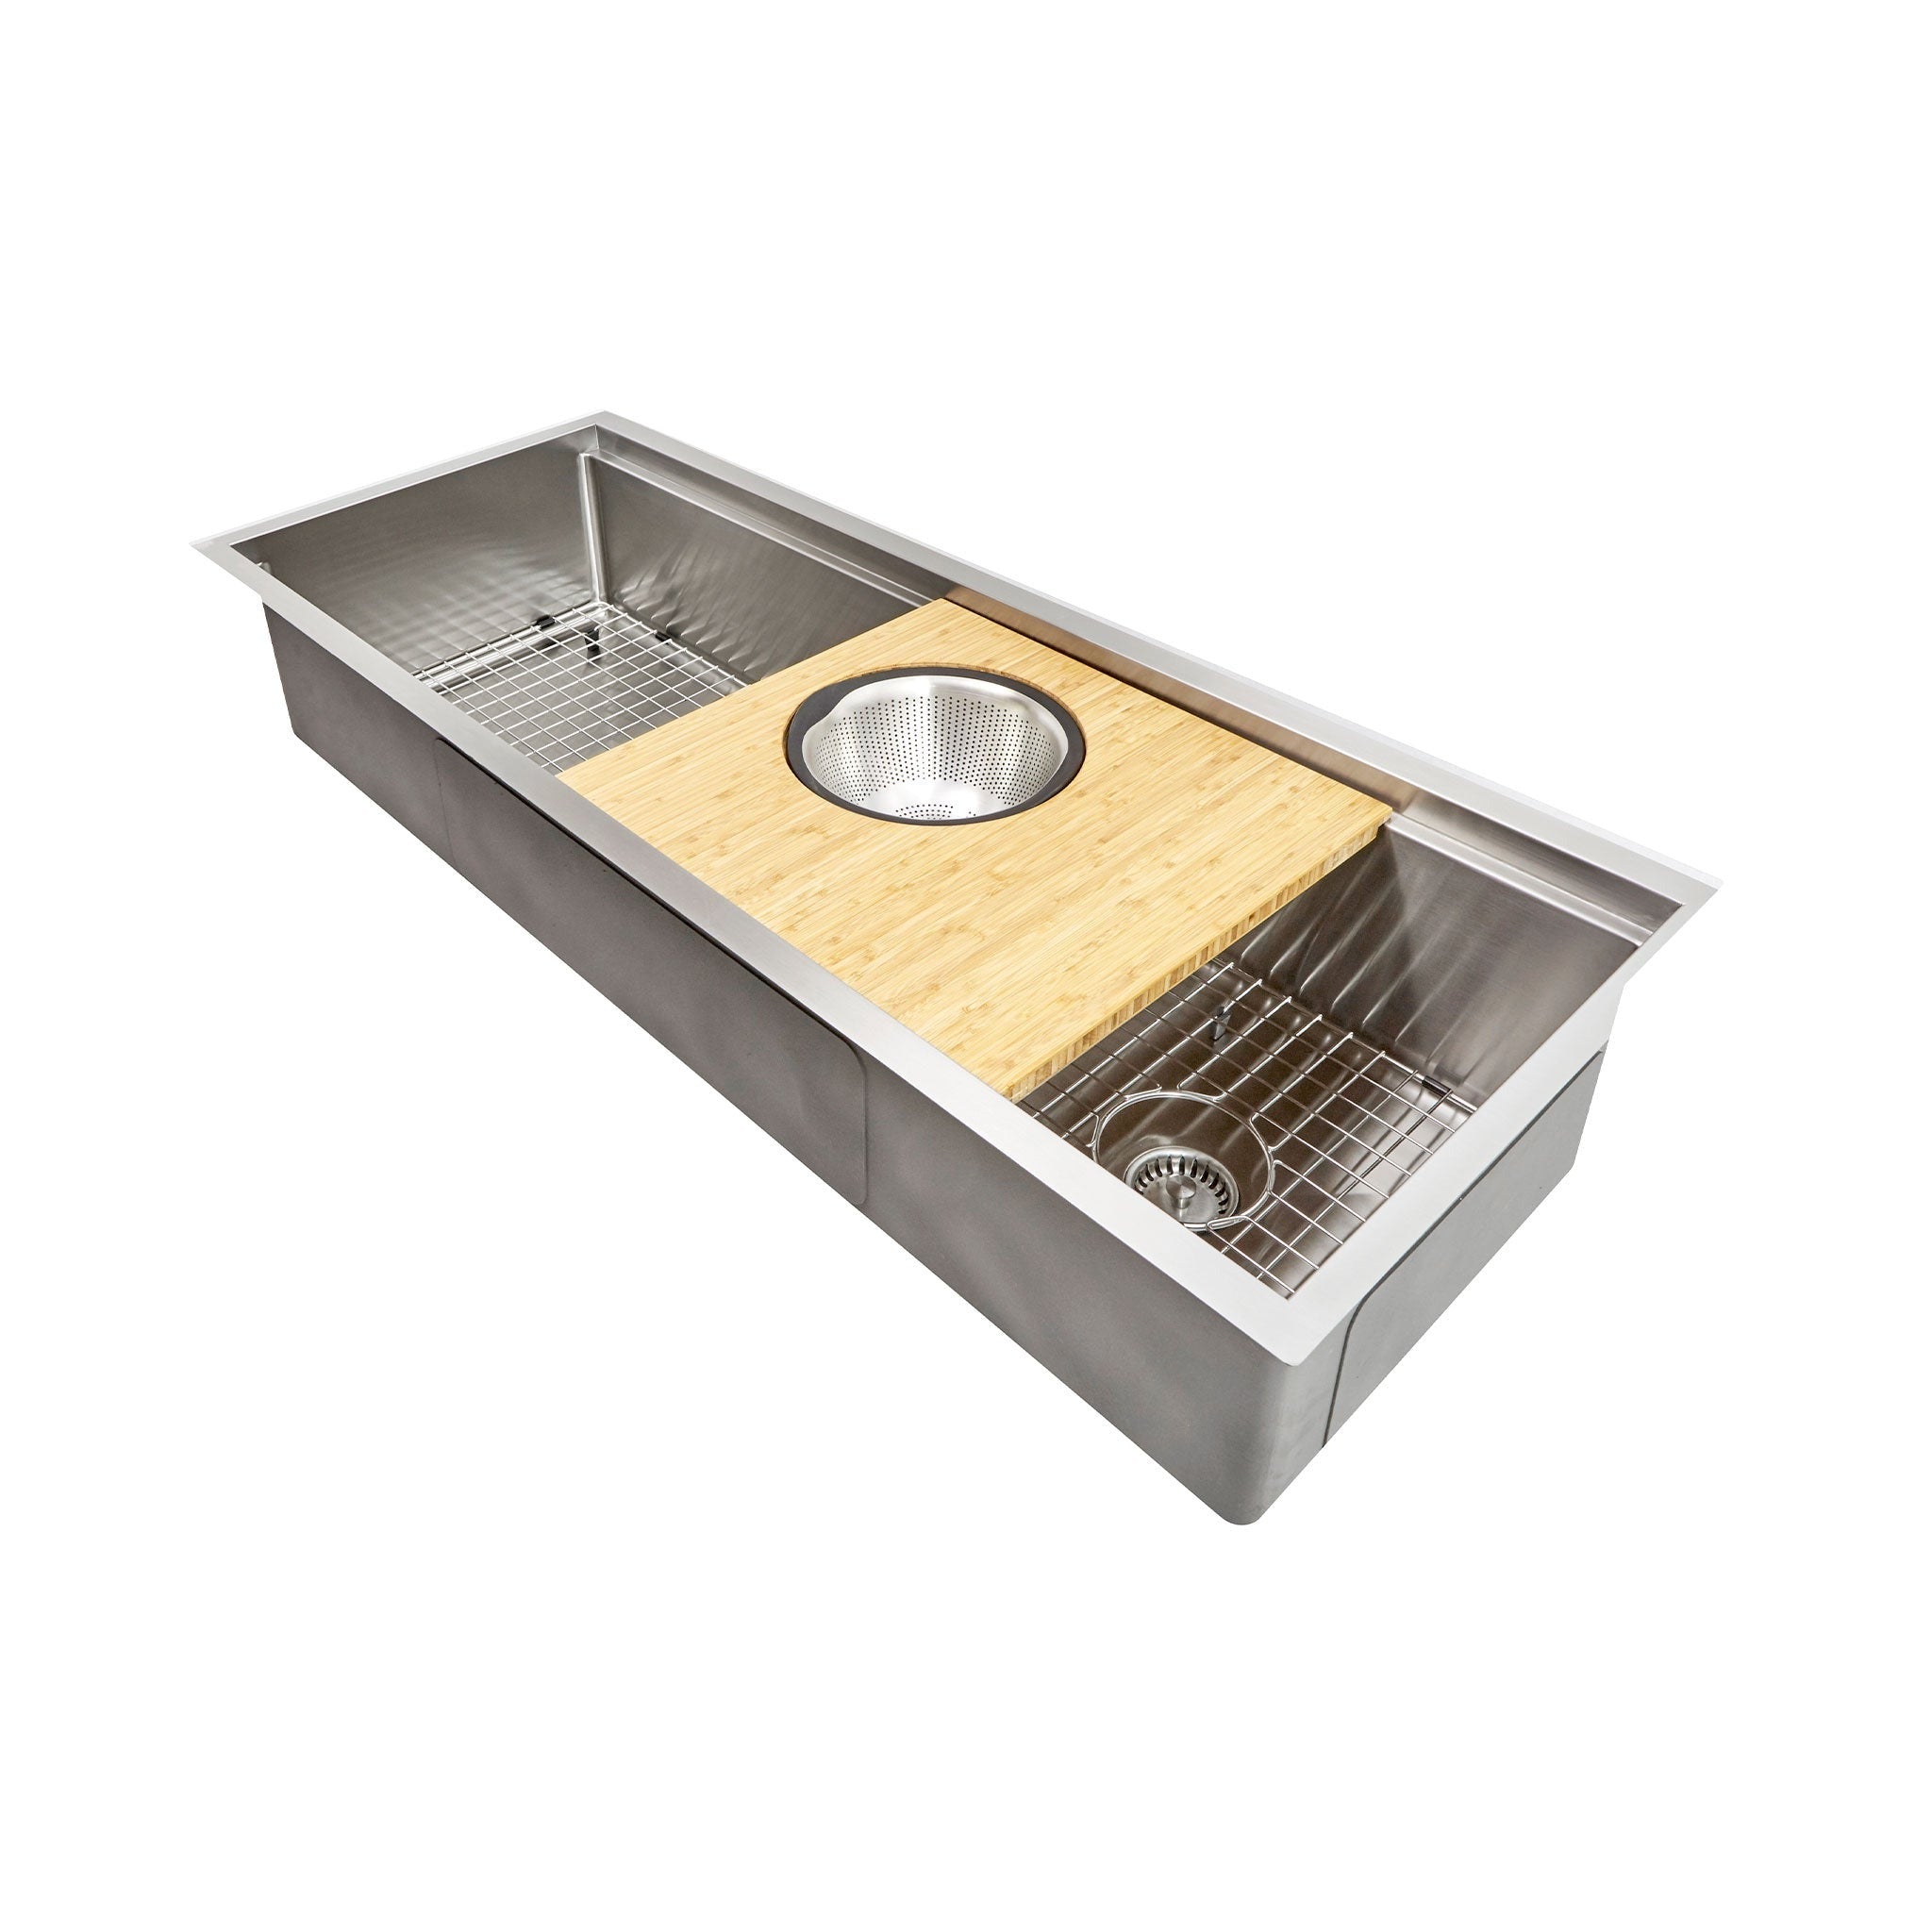 Bamboo cutting board in a large workstation kitchen sink from Create Good Sinks